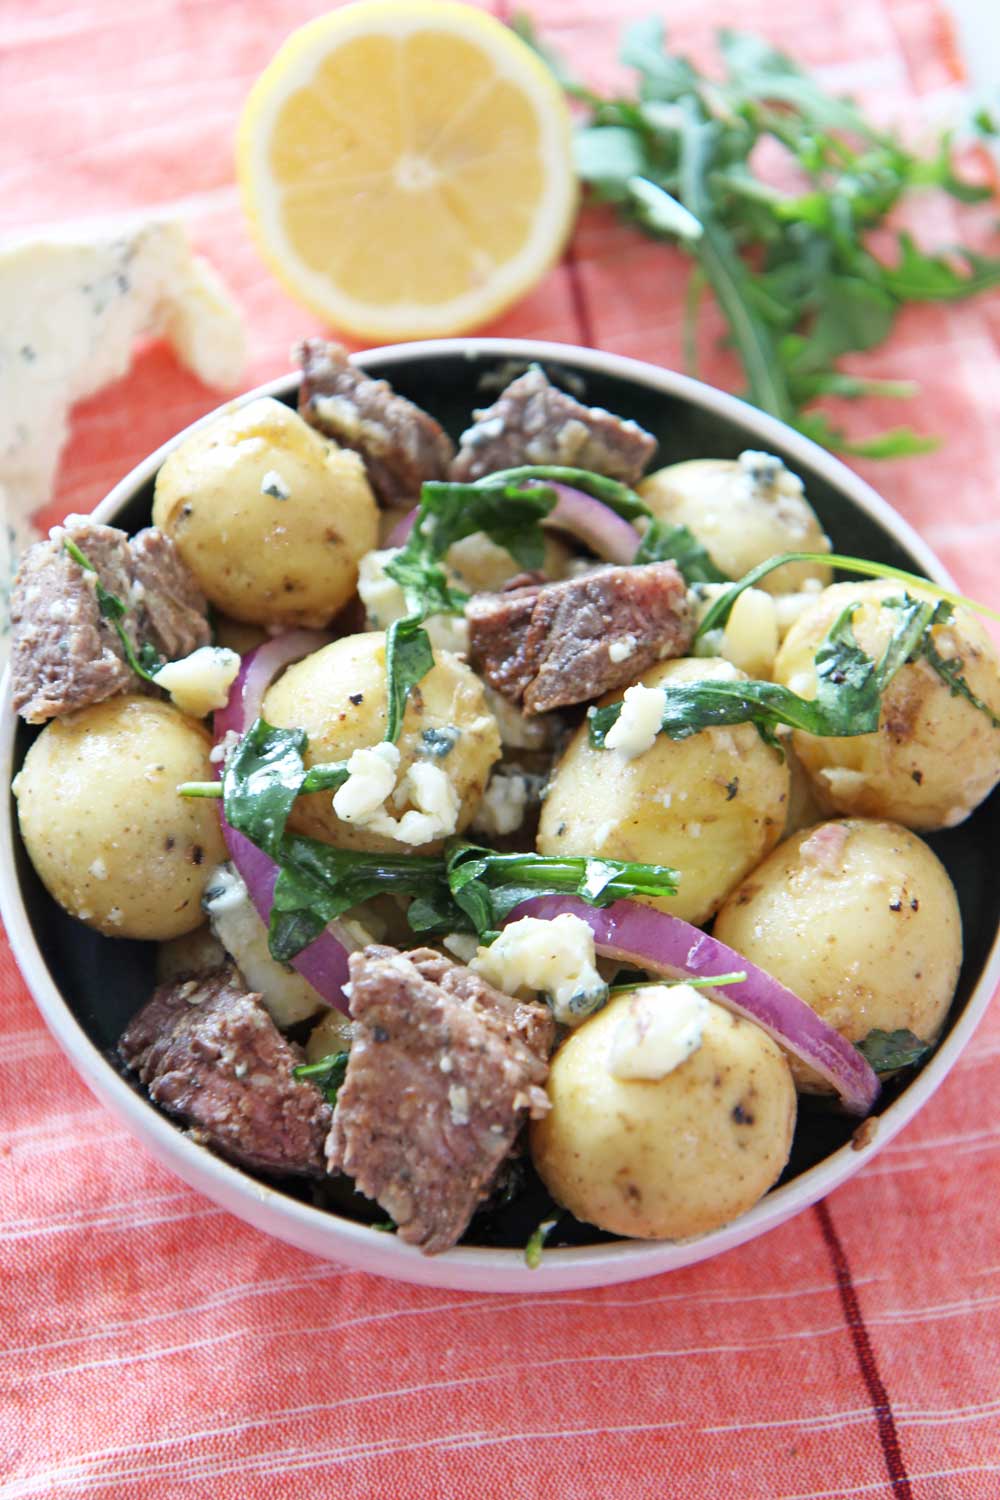 Steakhouse Steak and Potato Salad. This is a 20 minute recipe for busy weeknightt dinner. NY strip steak and Yukon gold potatoes mix with blue cheese and peppery arugula! Perfect next day leftovers. #potatosalad #steakrecipe